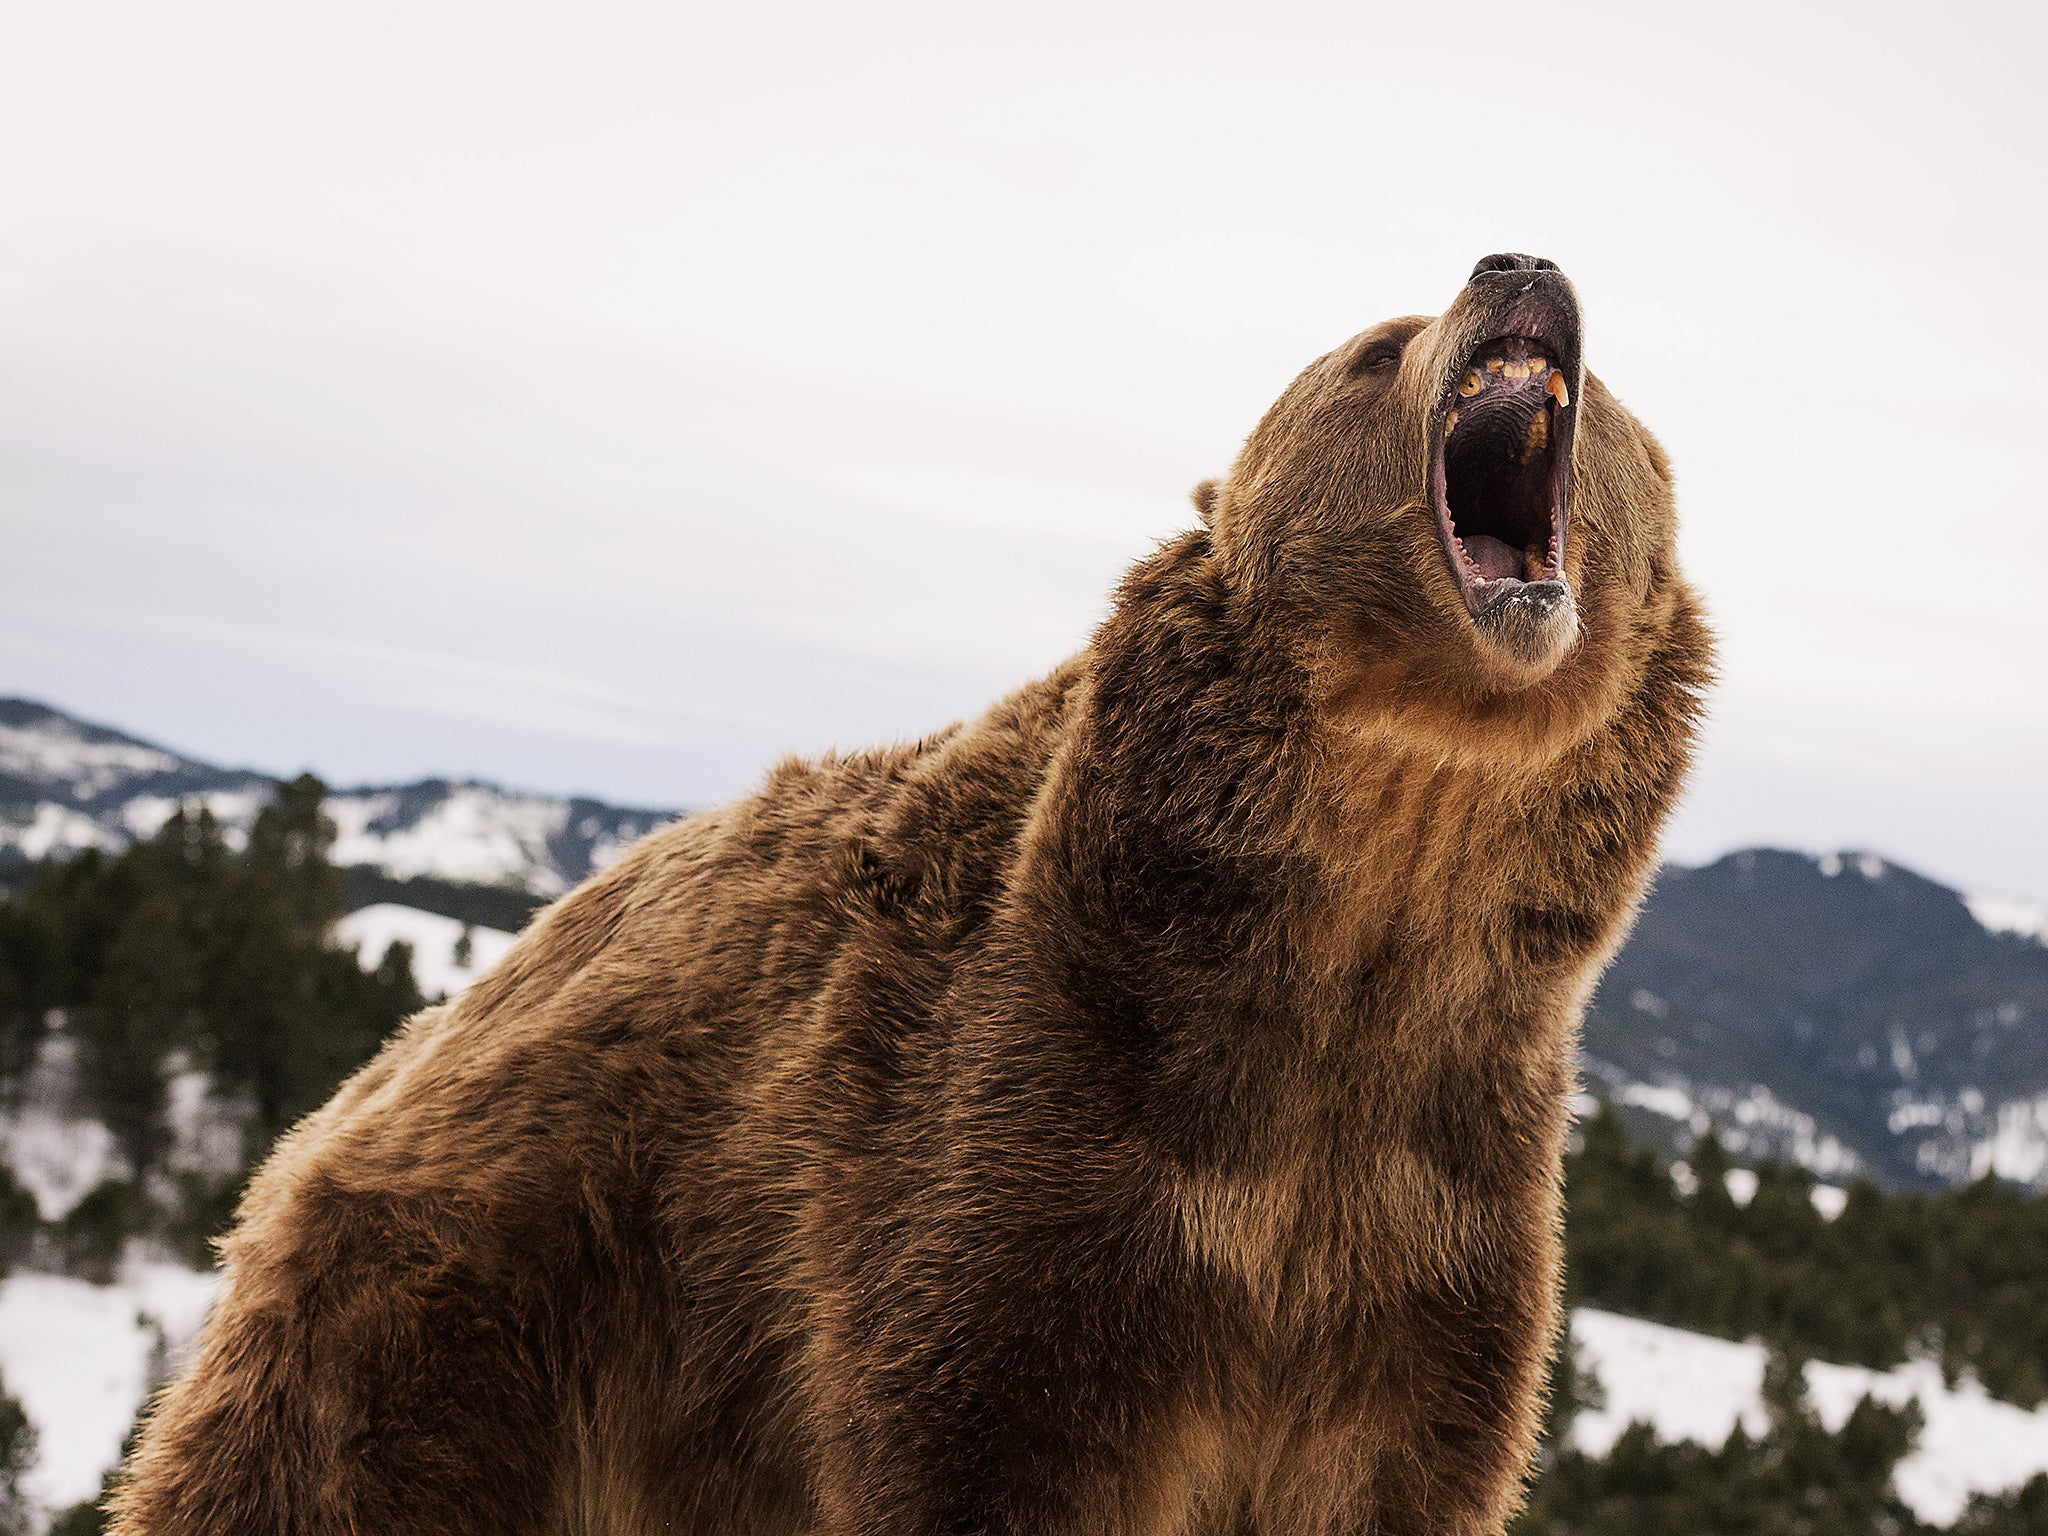 Brown bear (grizzly) (Ursus arctos), Montana, United States of America